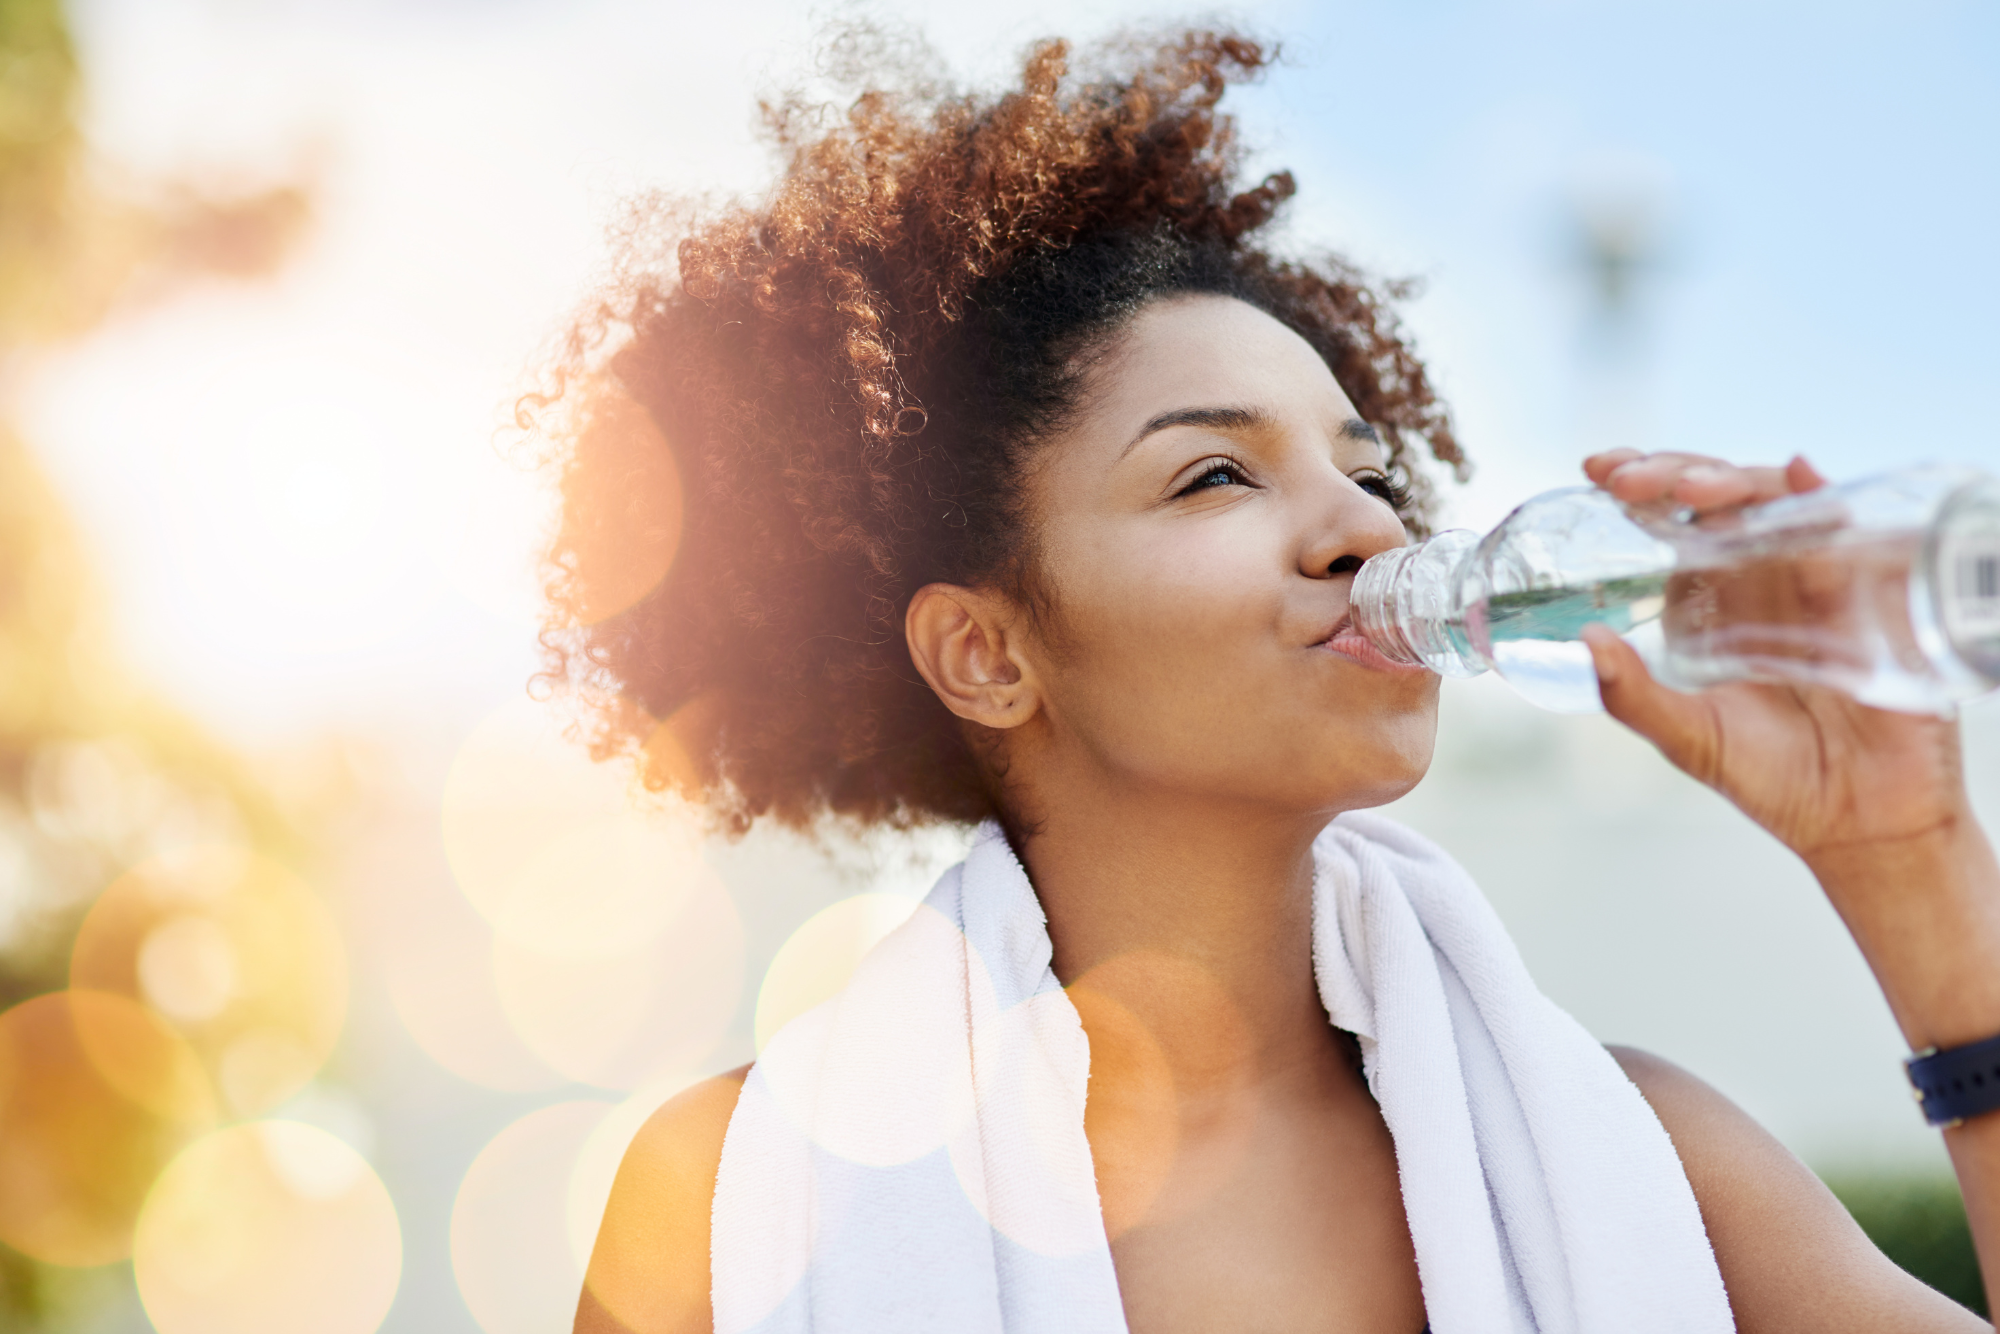 Stay Cool This Summer: The Importance of Staying Hydrated in Hot Weather